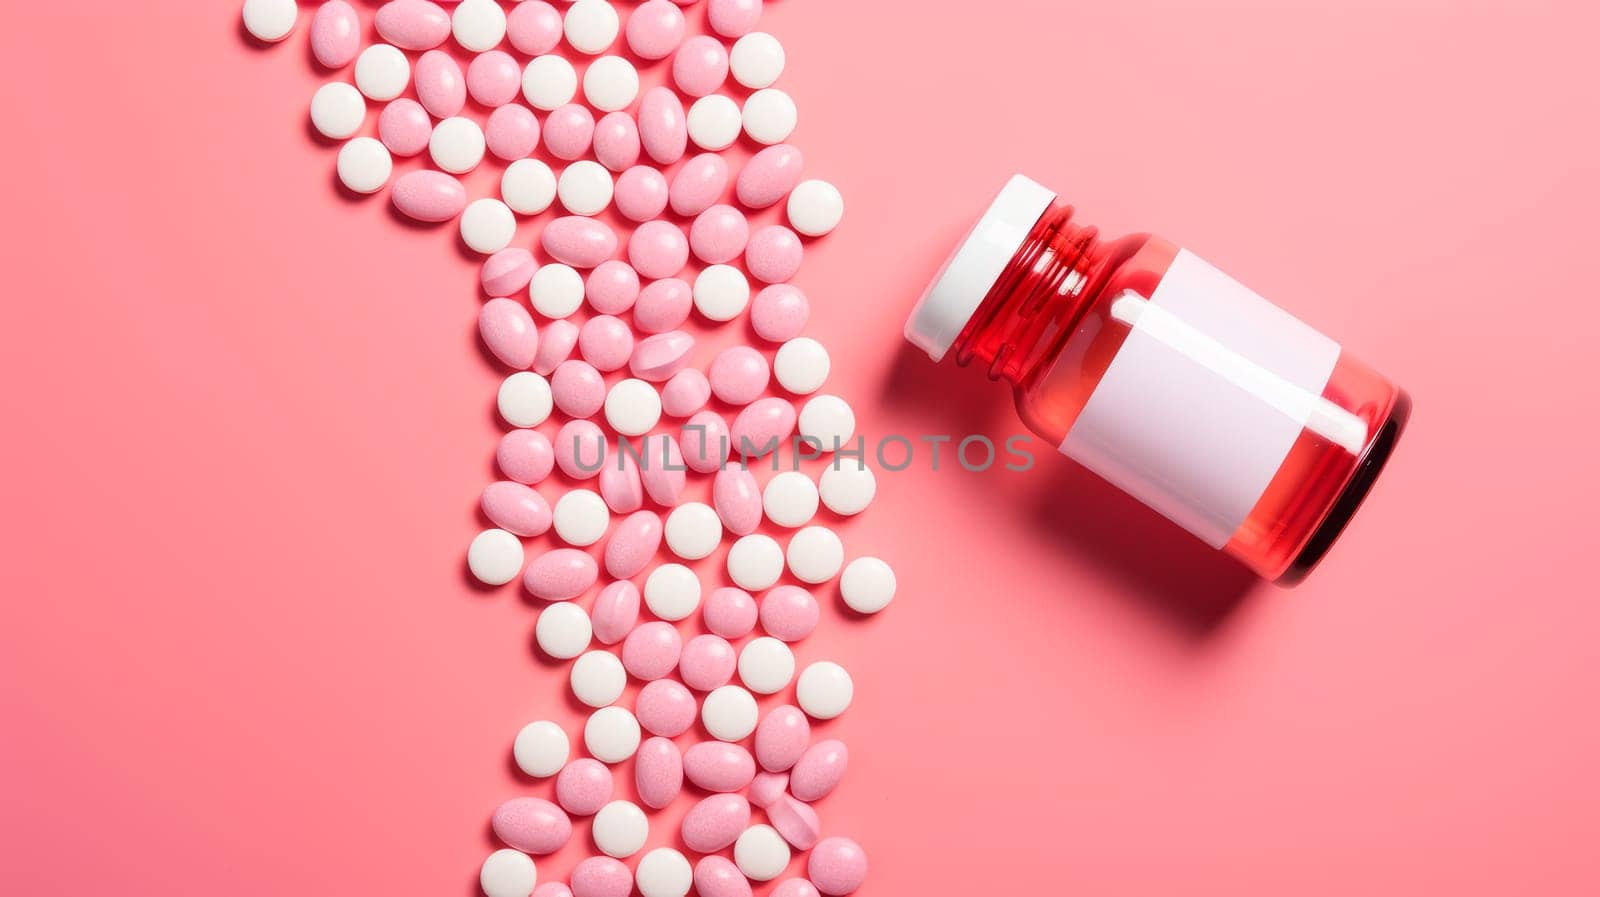 White pink pills, capsules and vitamins in a jar on a pink background. by Alla_Yurtayeva